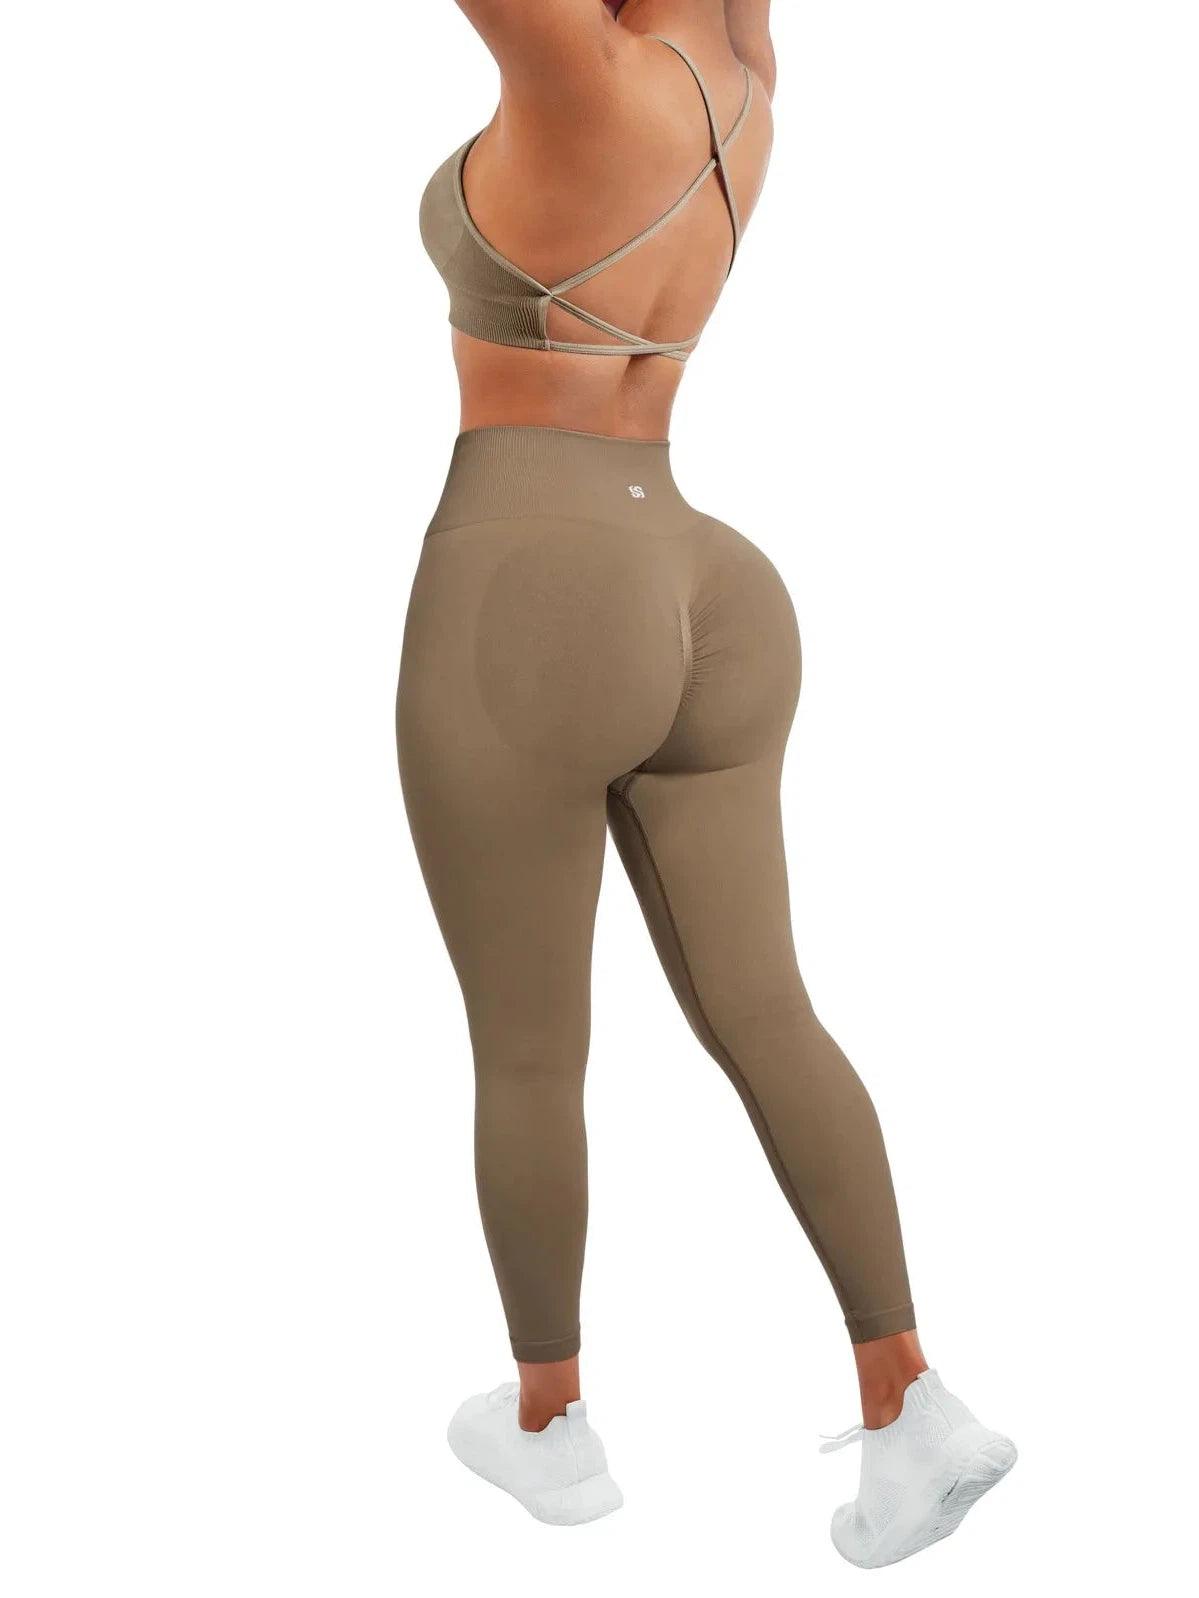 Suuksess Official Store  Shop Women's Activewear, Leggings & More